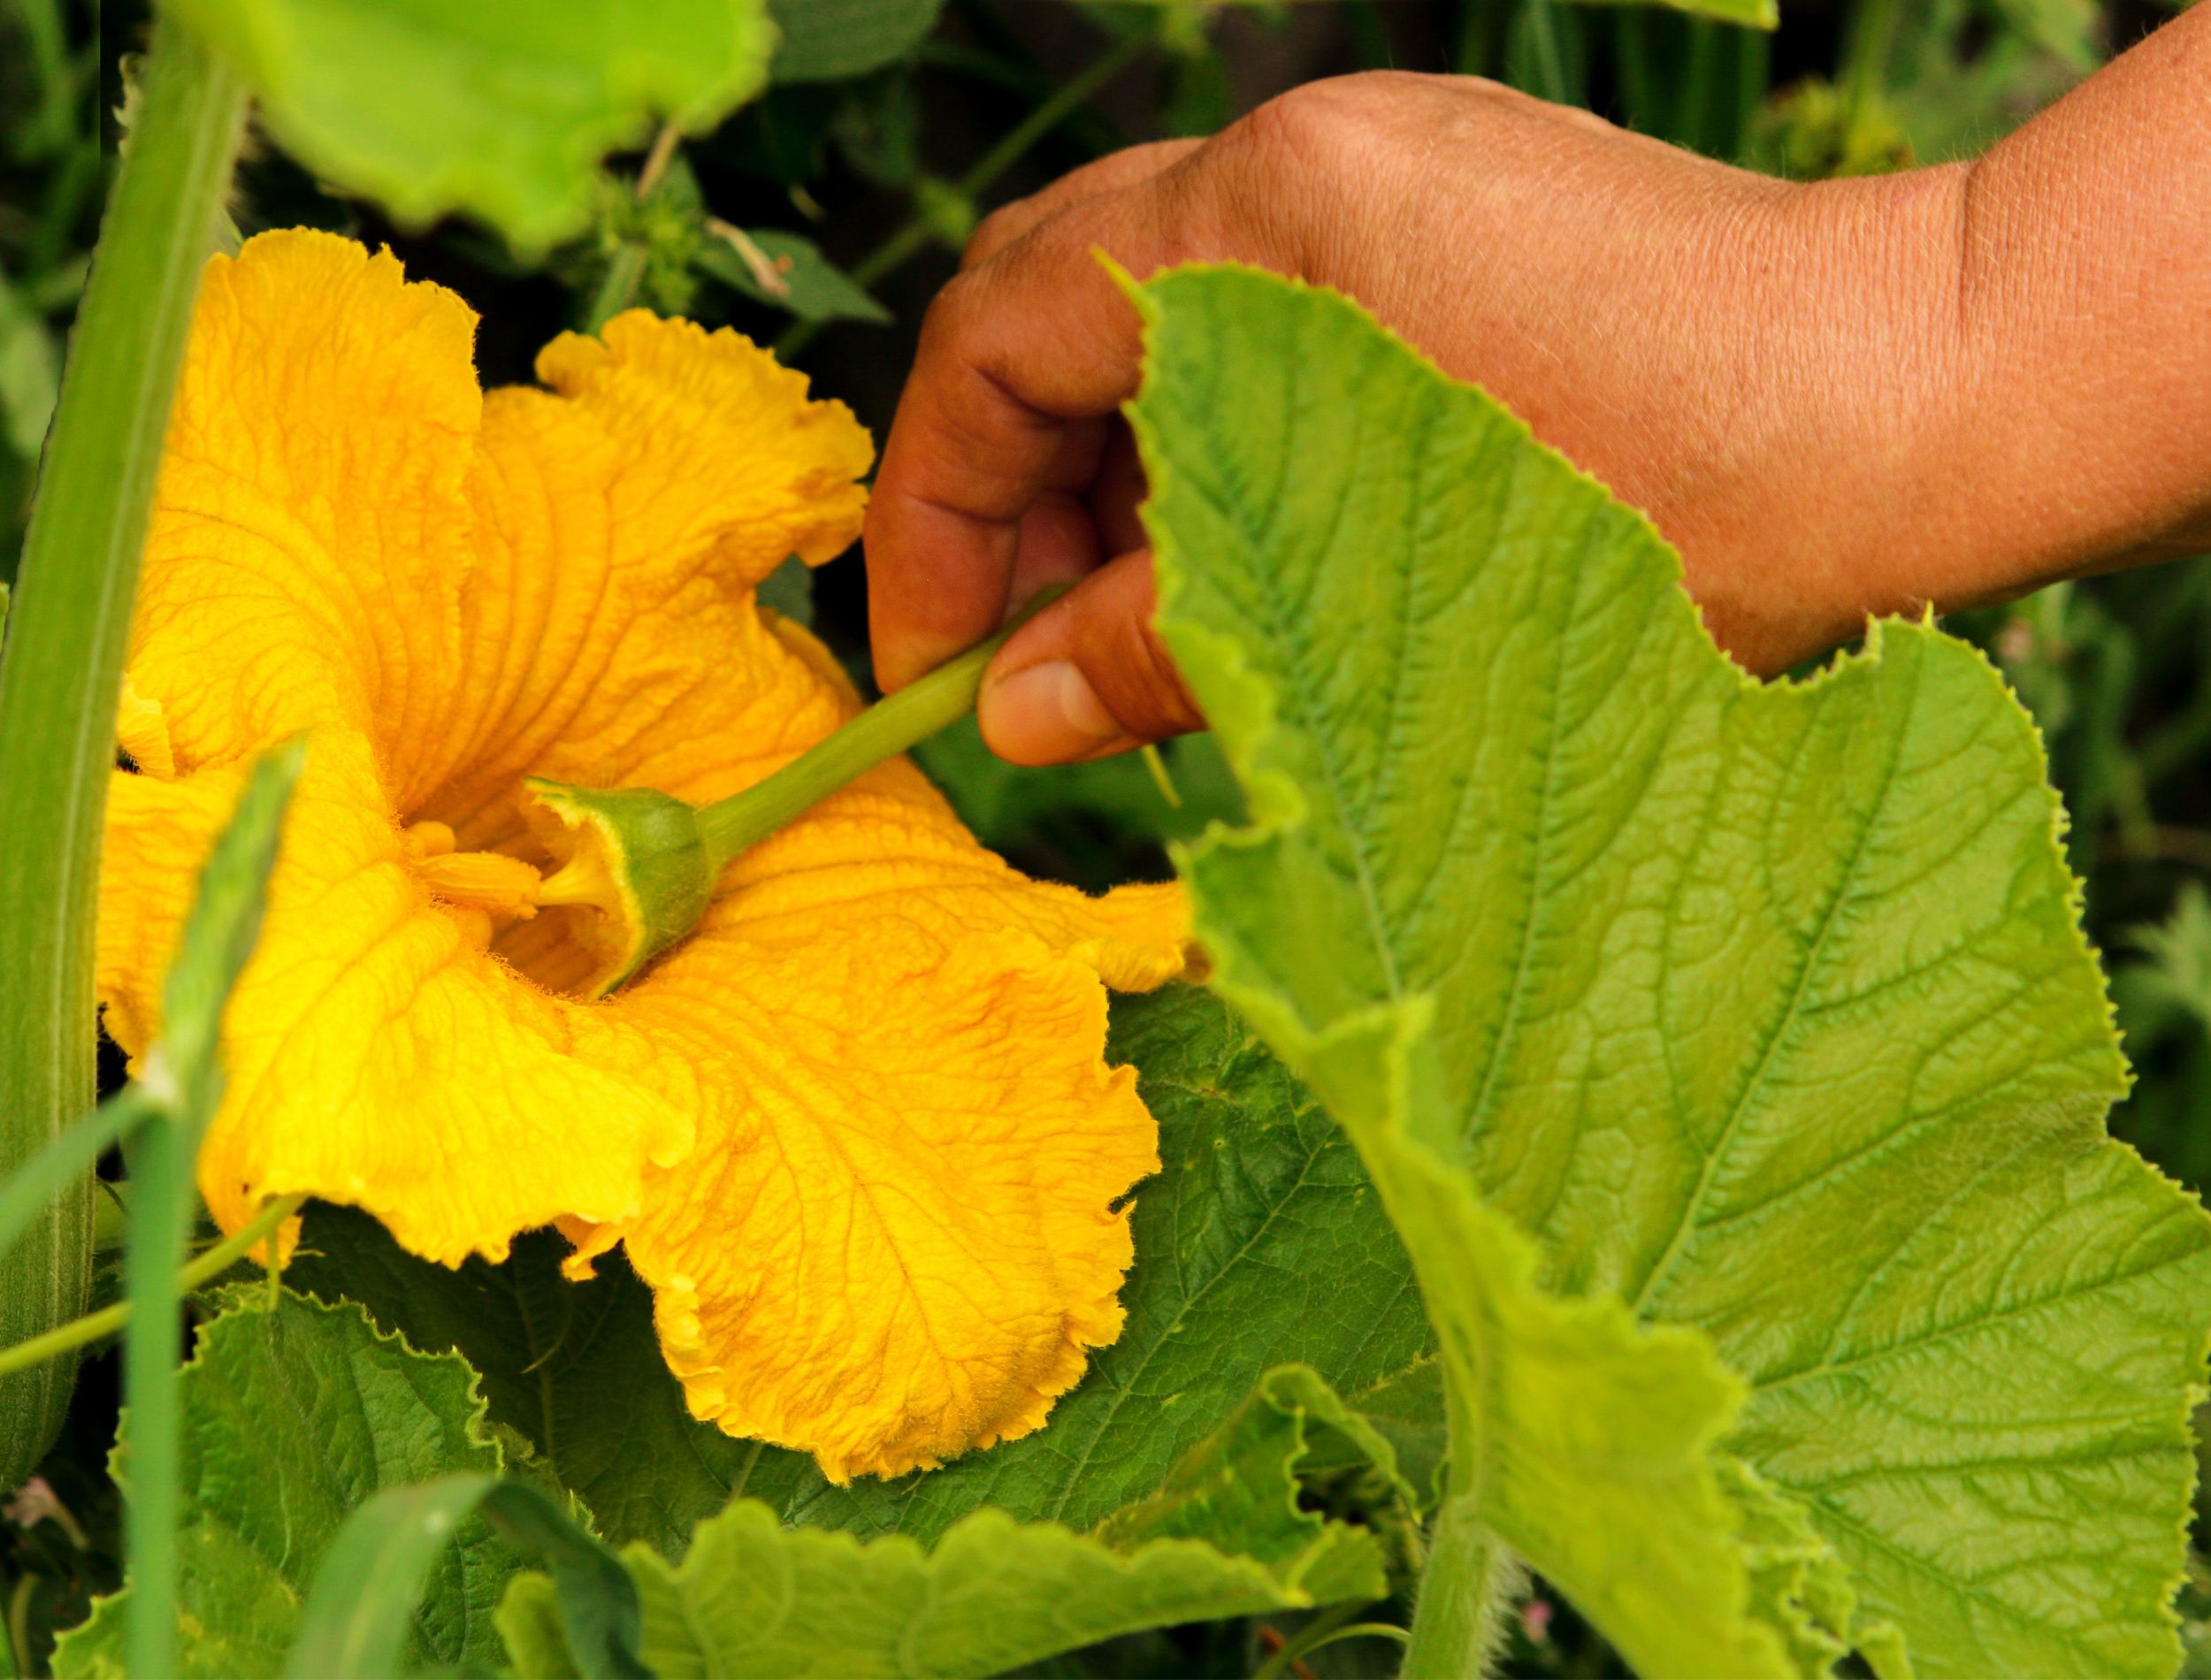 How to Pollinate Squash by Hand for a Bigger Yield